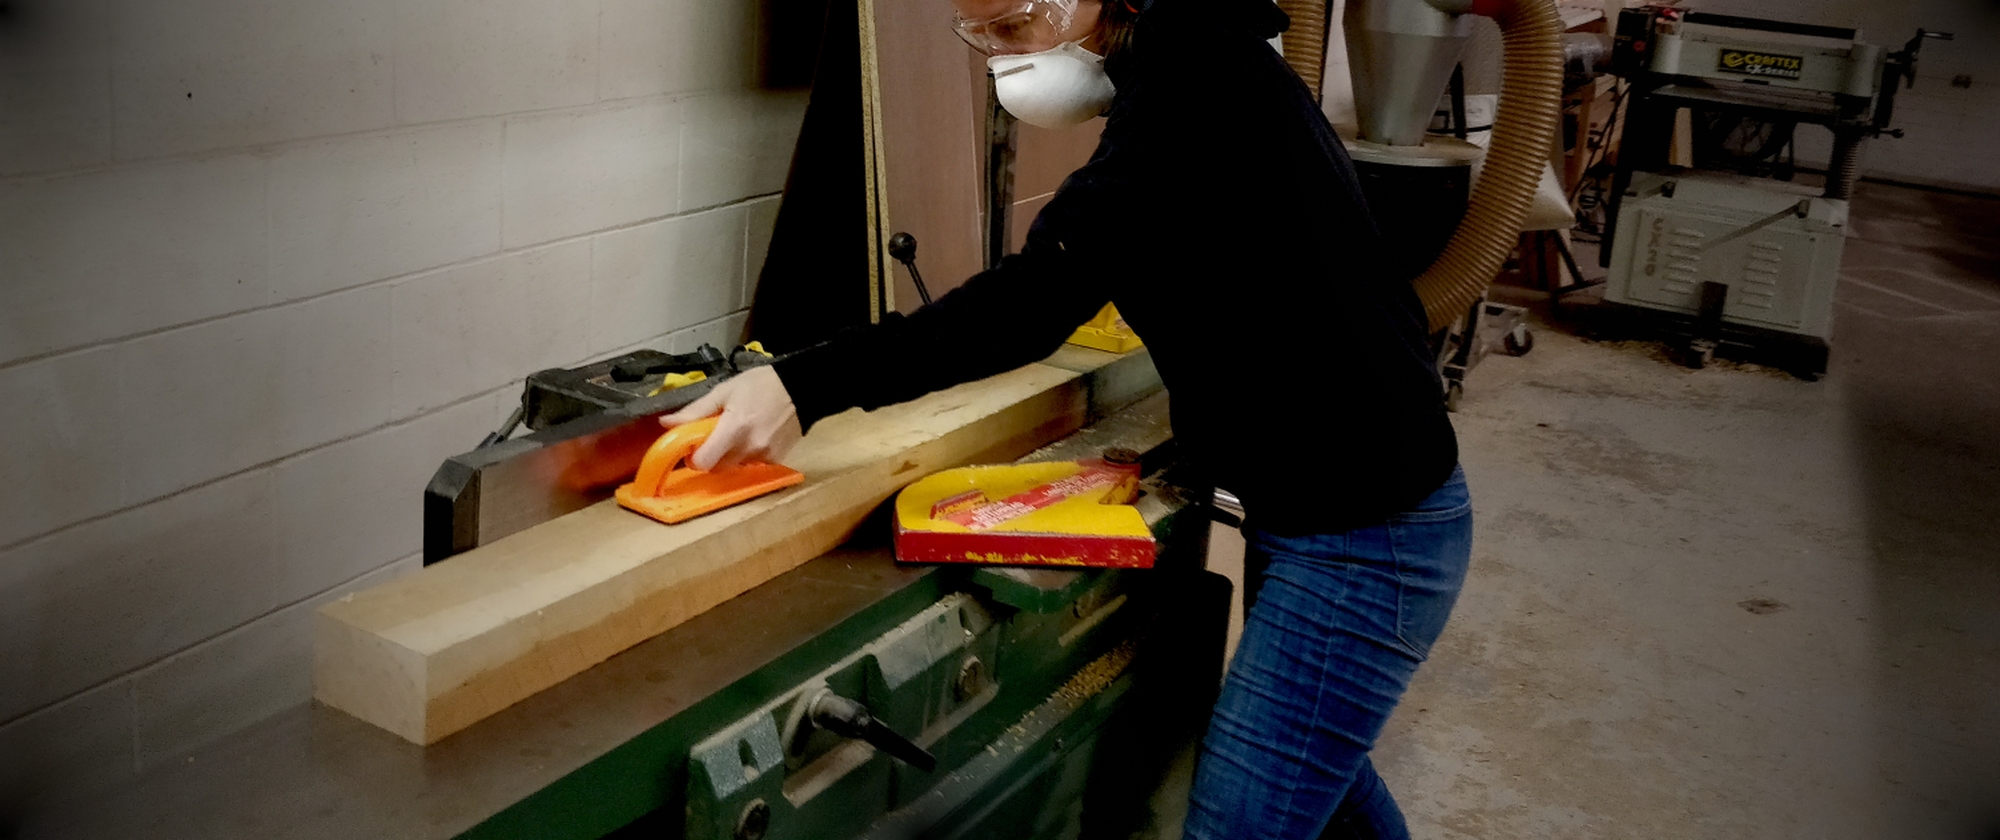 Woman woodworker working with Cherry hardwood lumber on a jointer machine